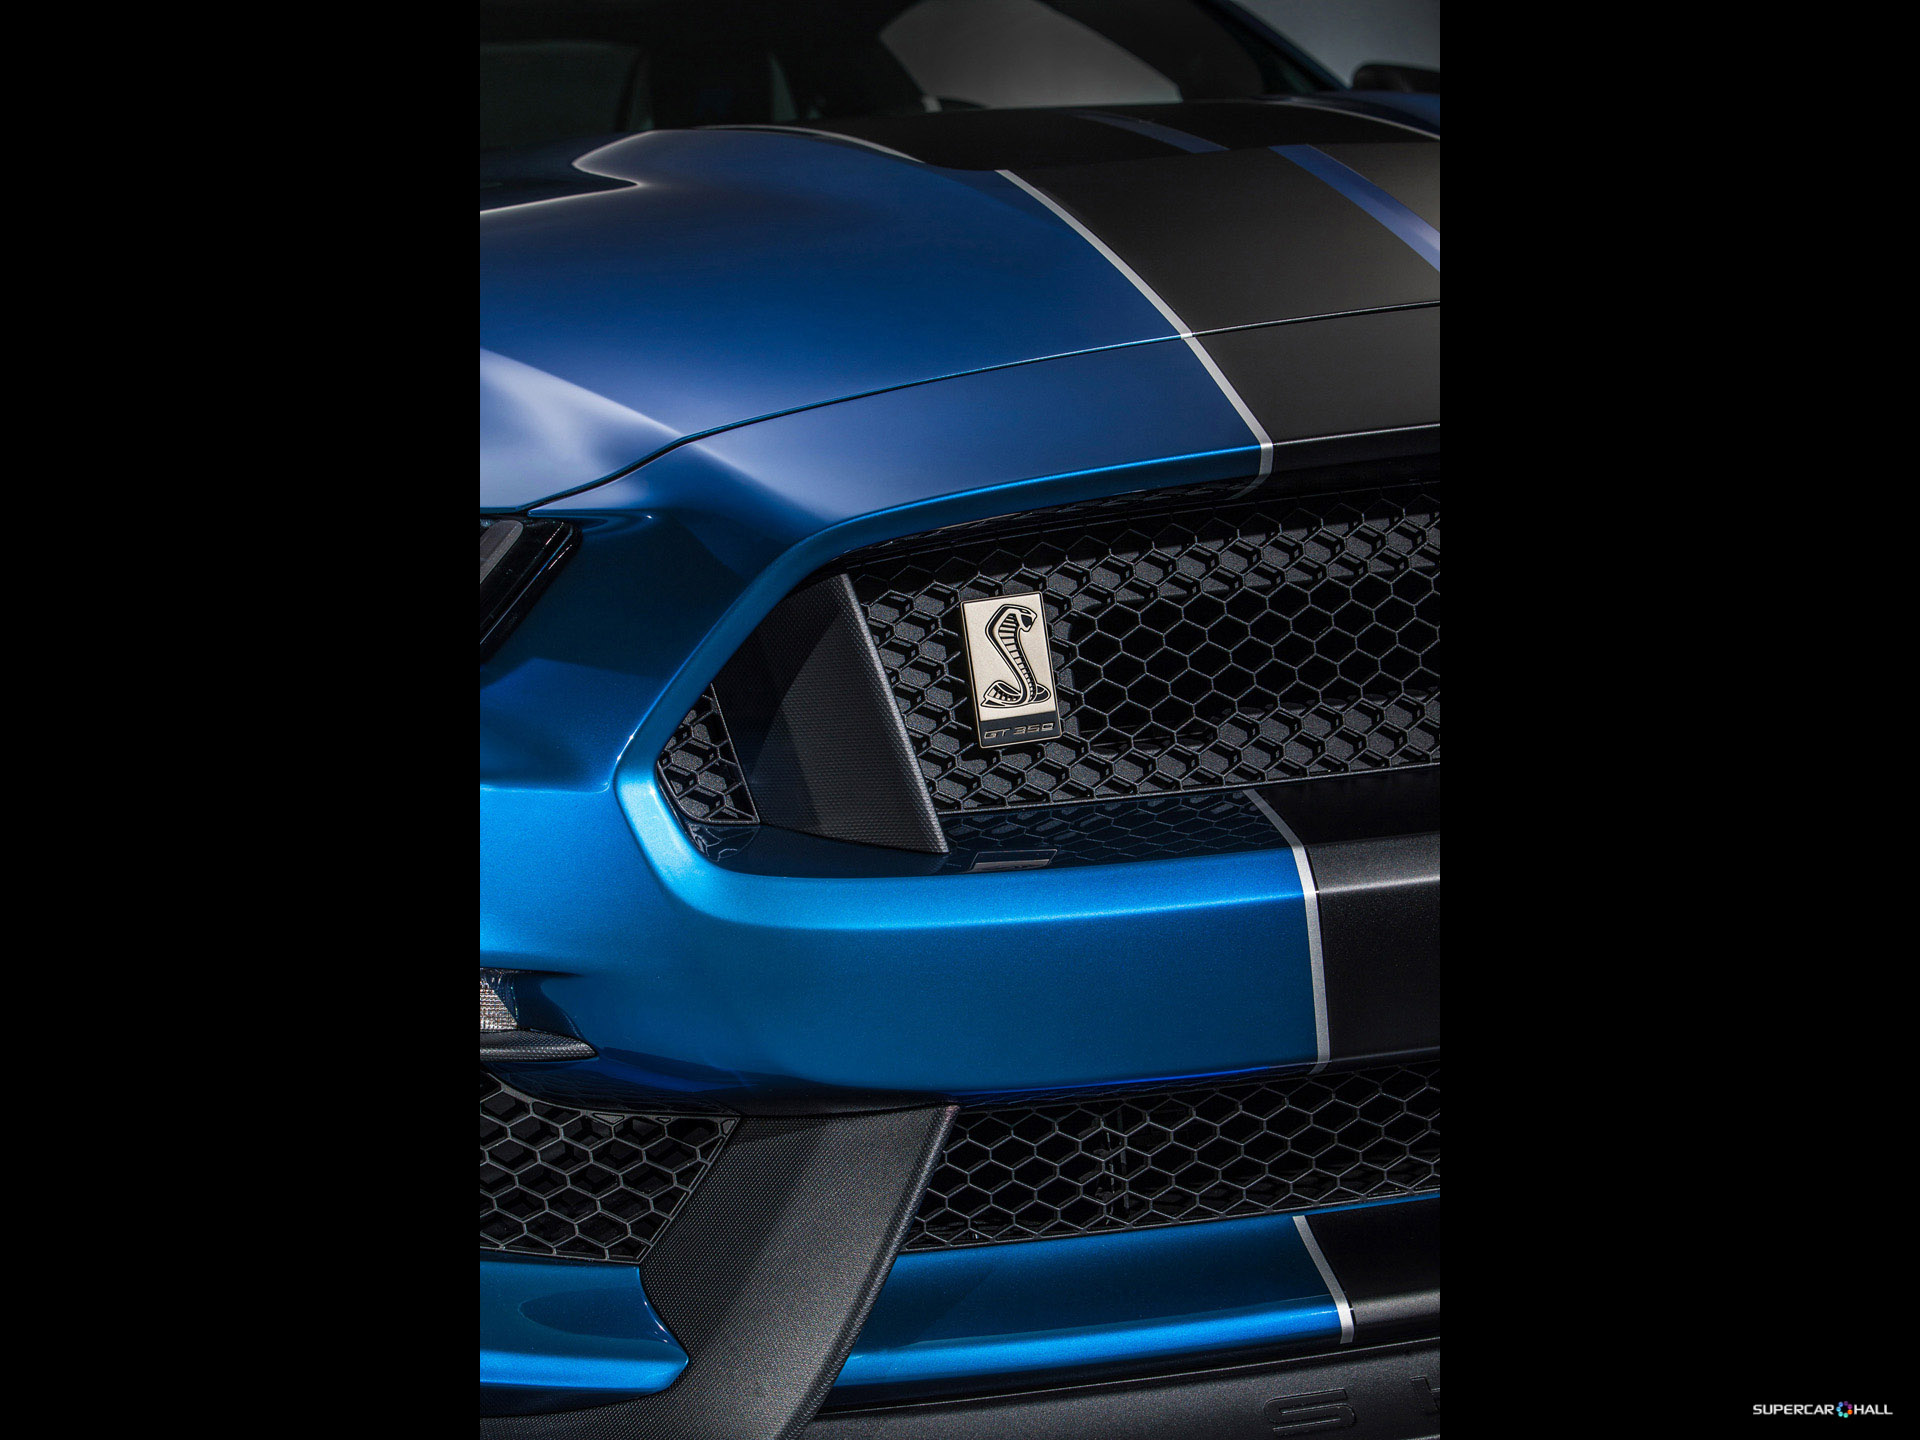 Ford Mustang Shelby Gt350r